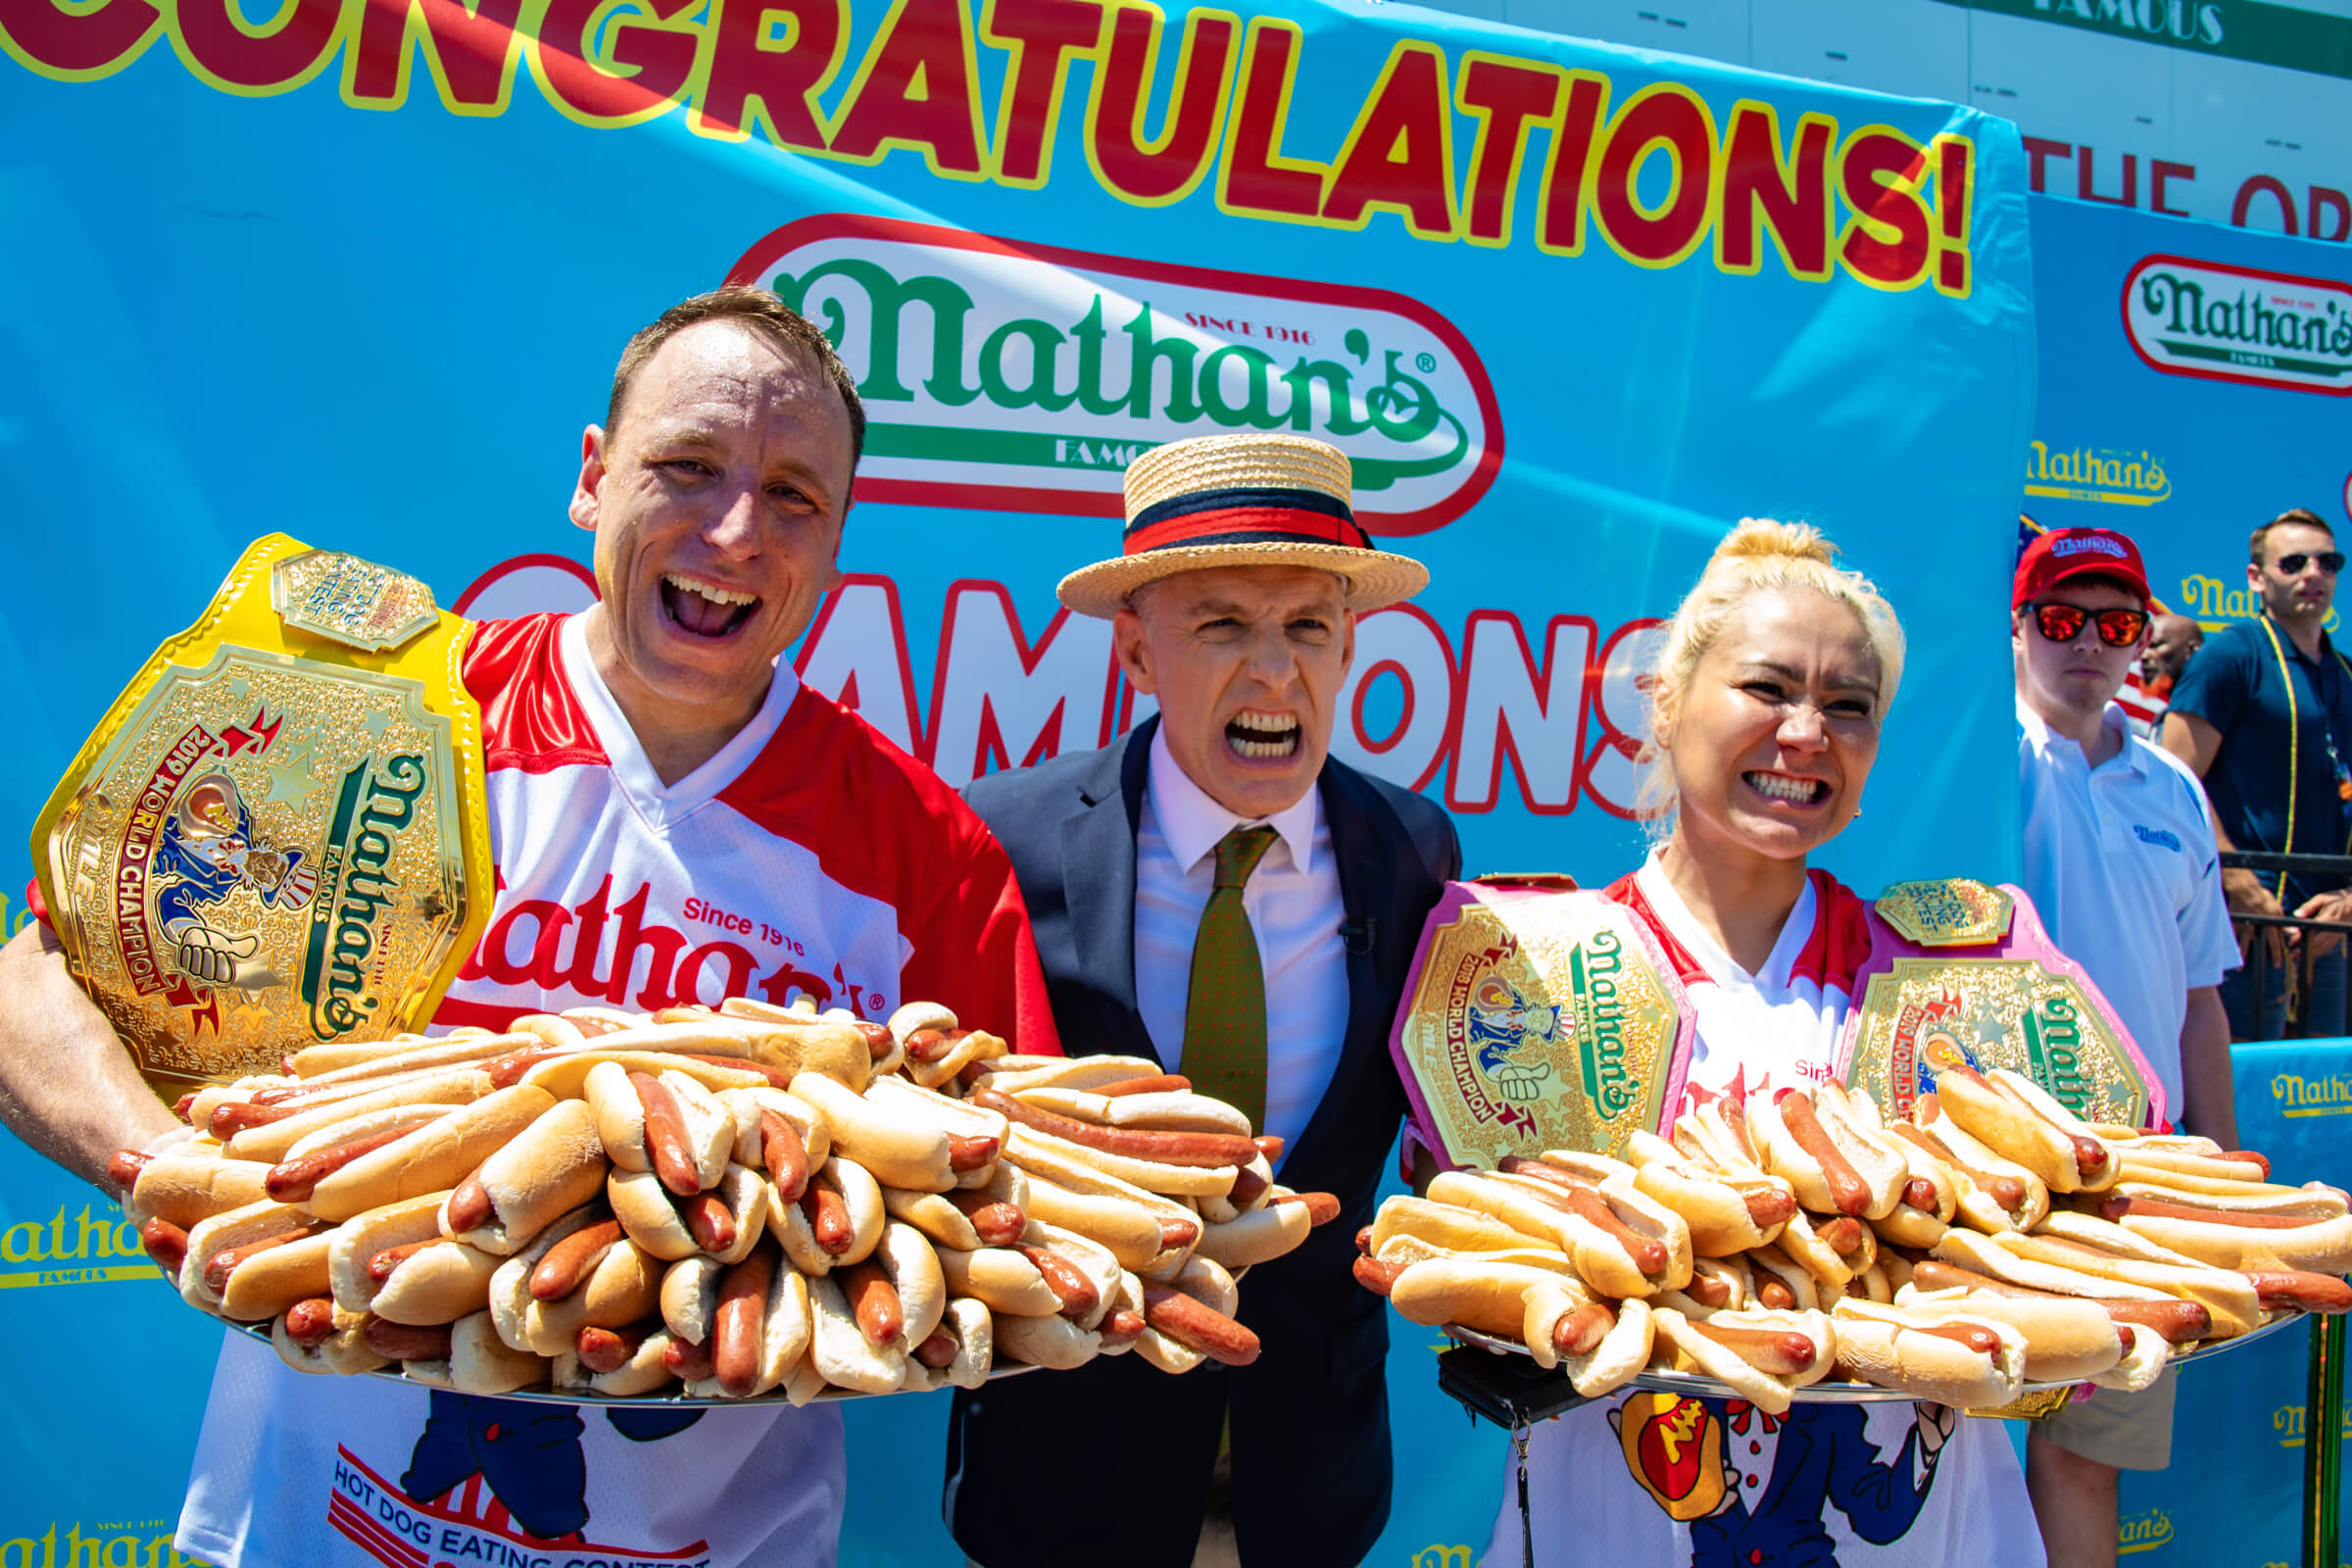 Nathans hotdogs contest 2021 tickets information